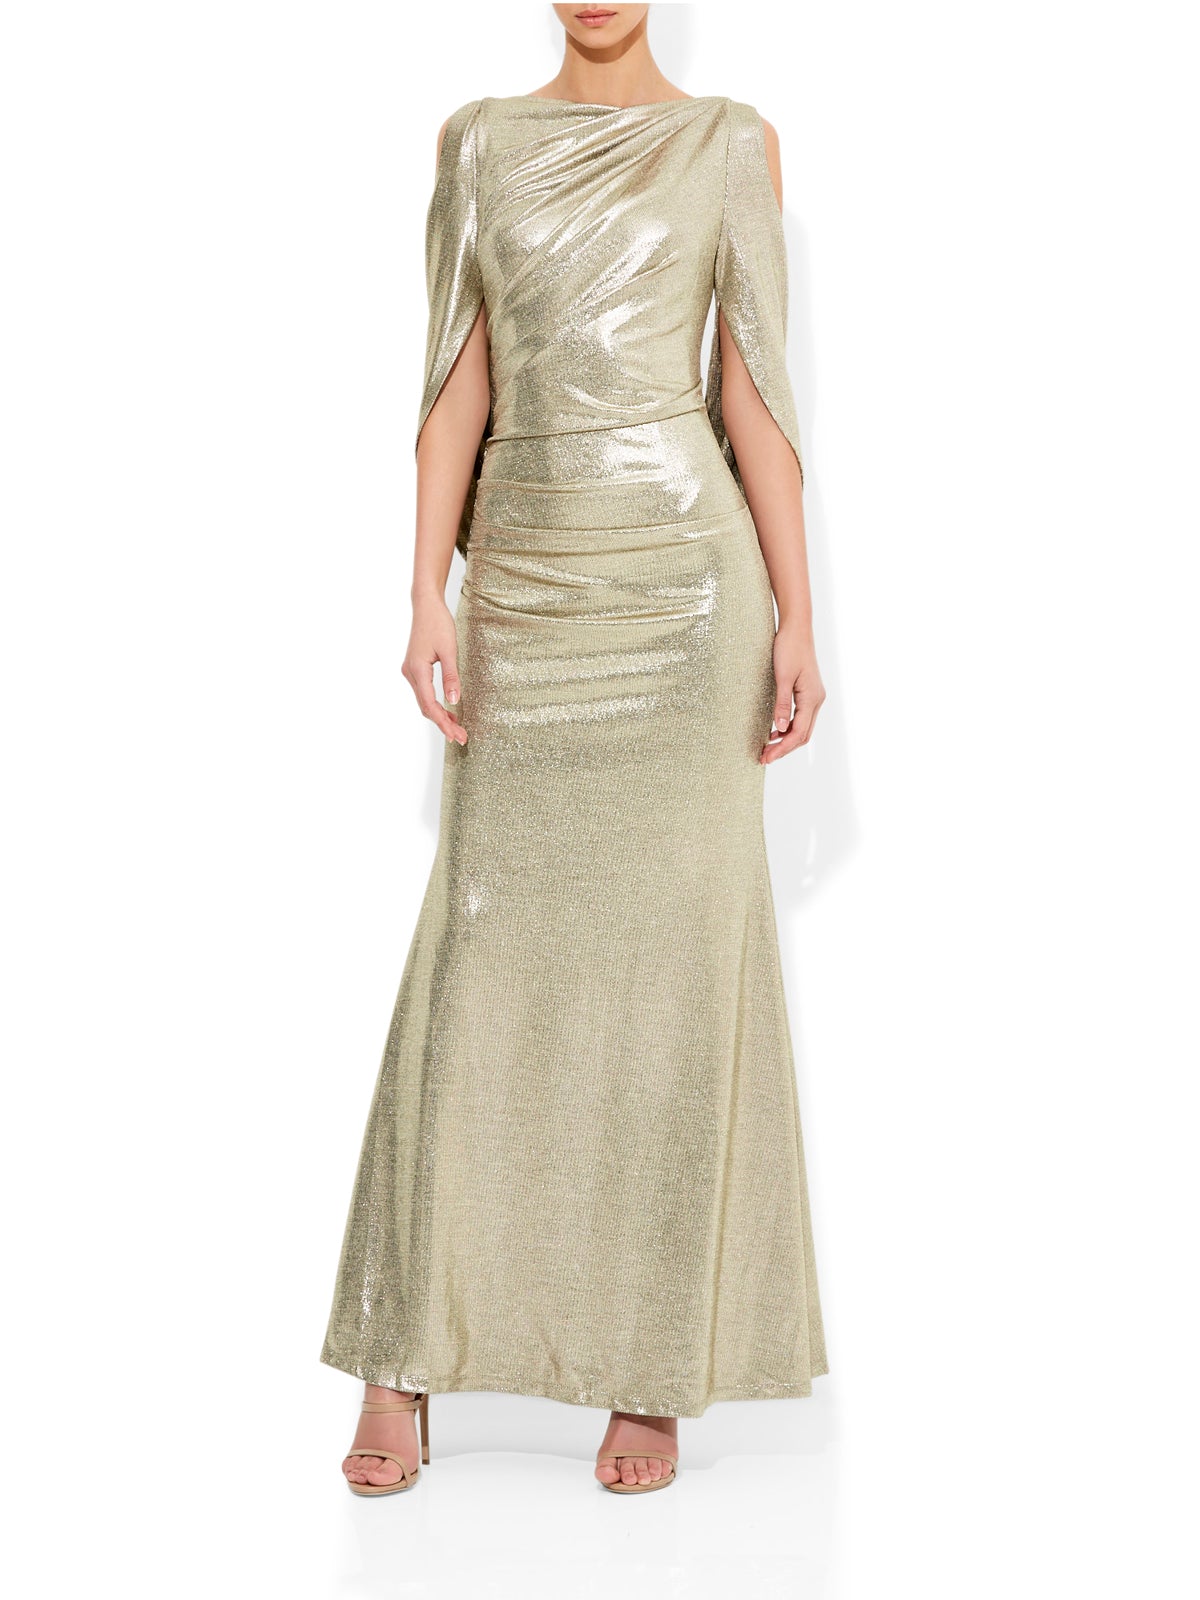 Lana Gold Metallic Gown by Montique